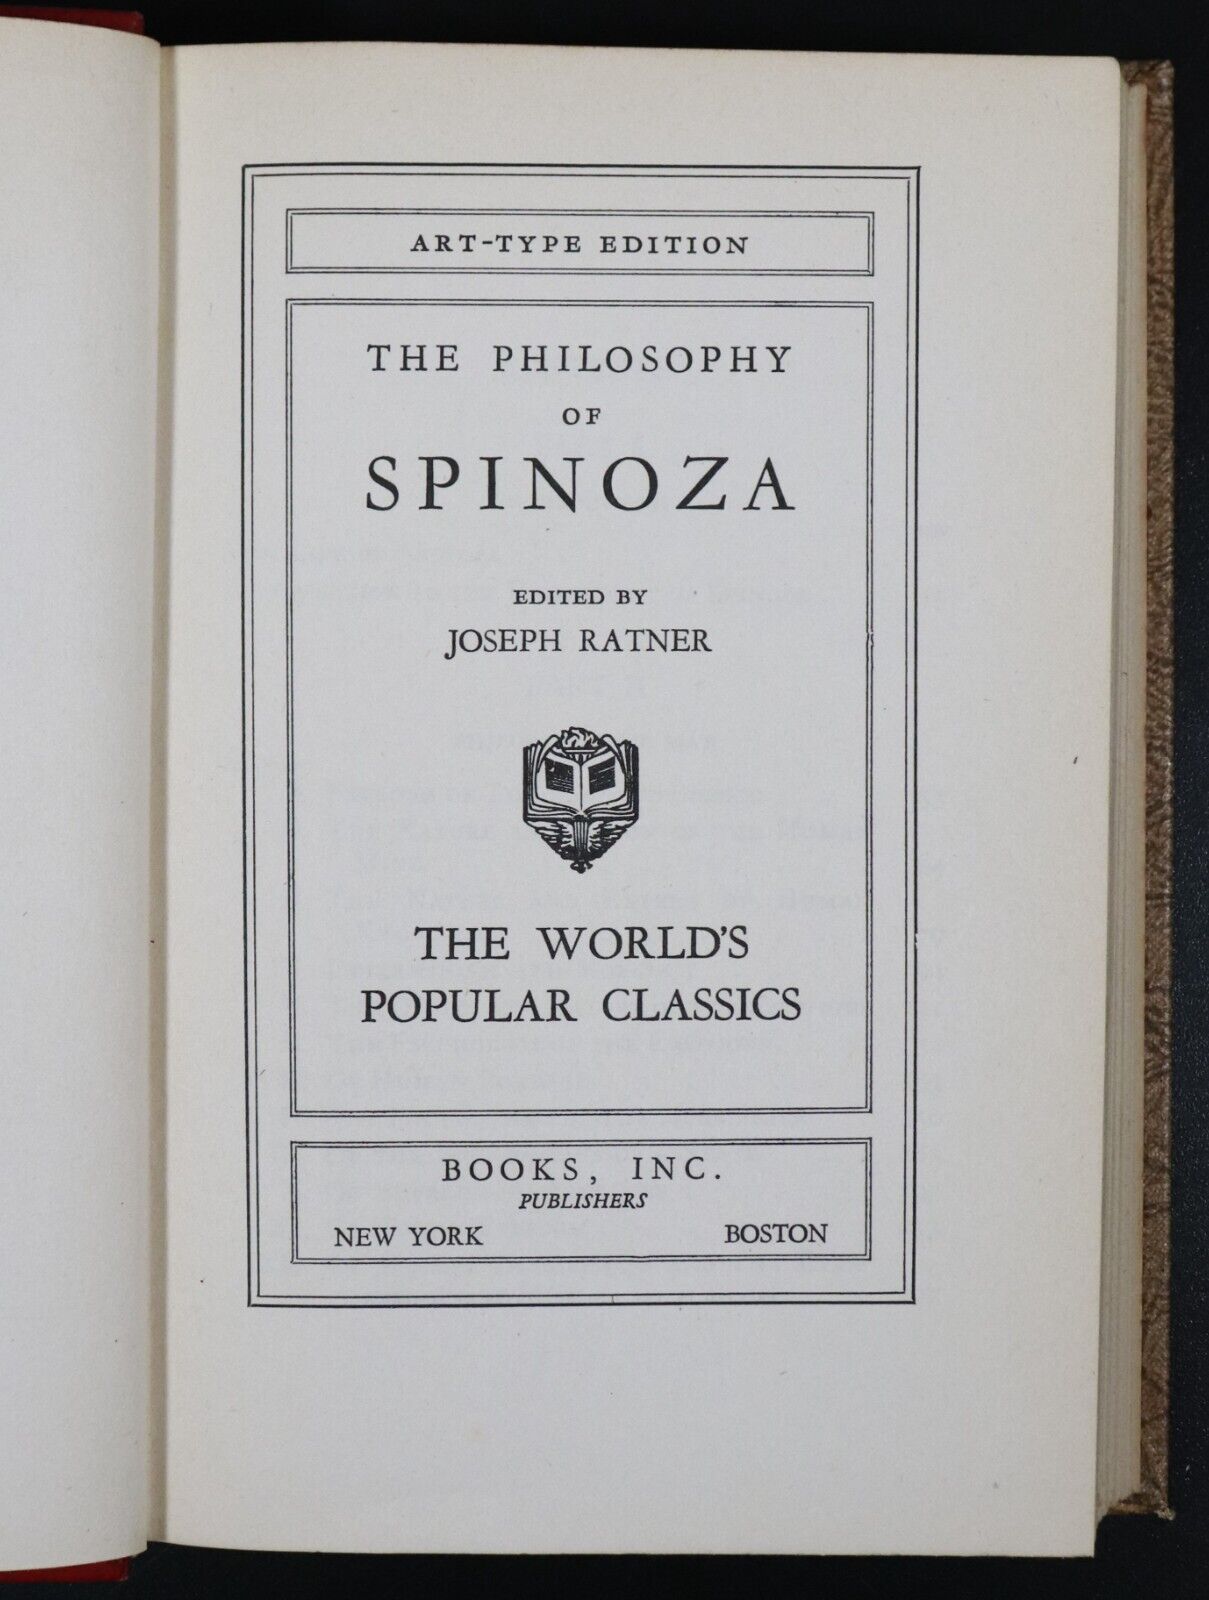 c1950 The Philosophy of Spinoza - Art Type Edition - Vintage Philosophy Book